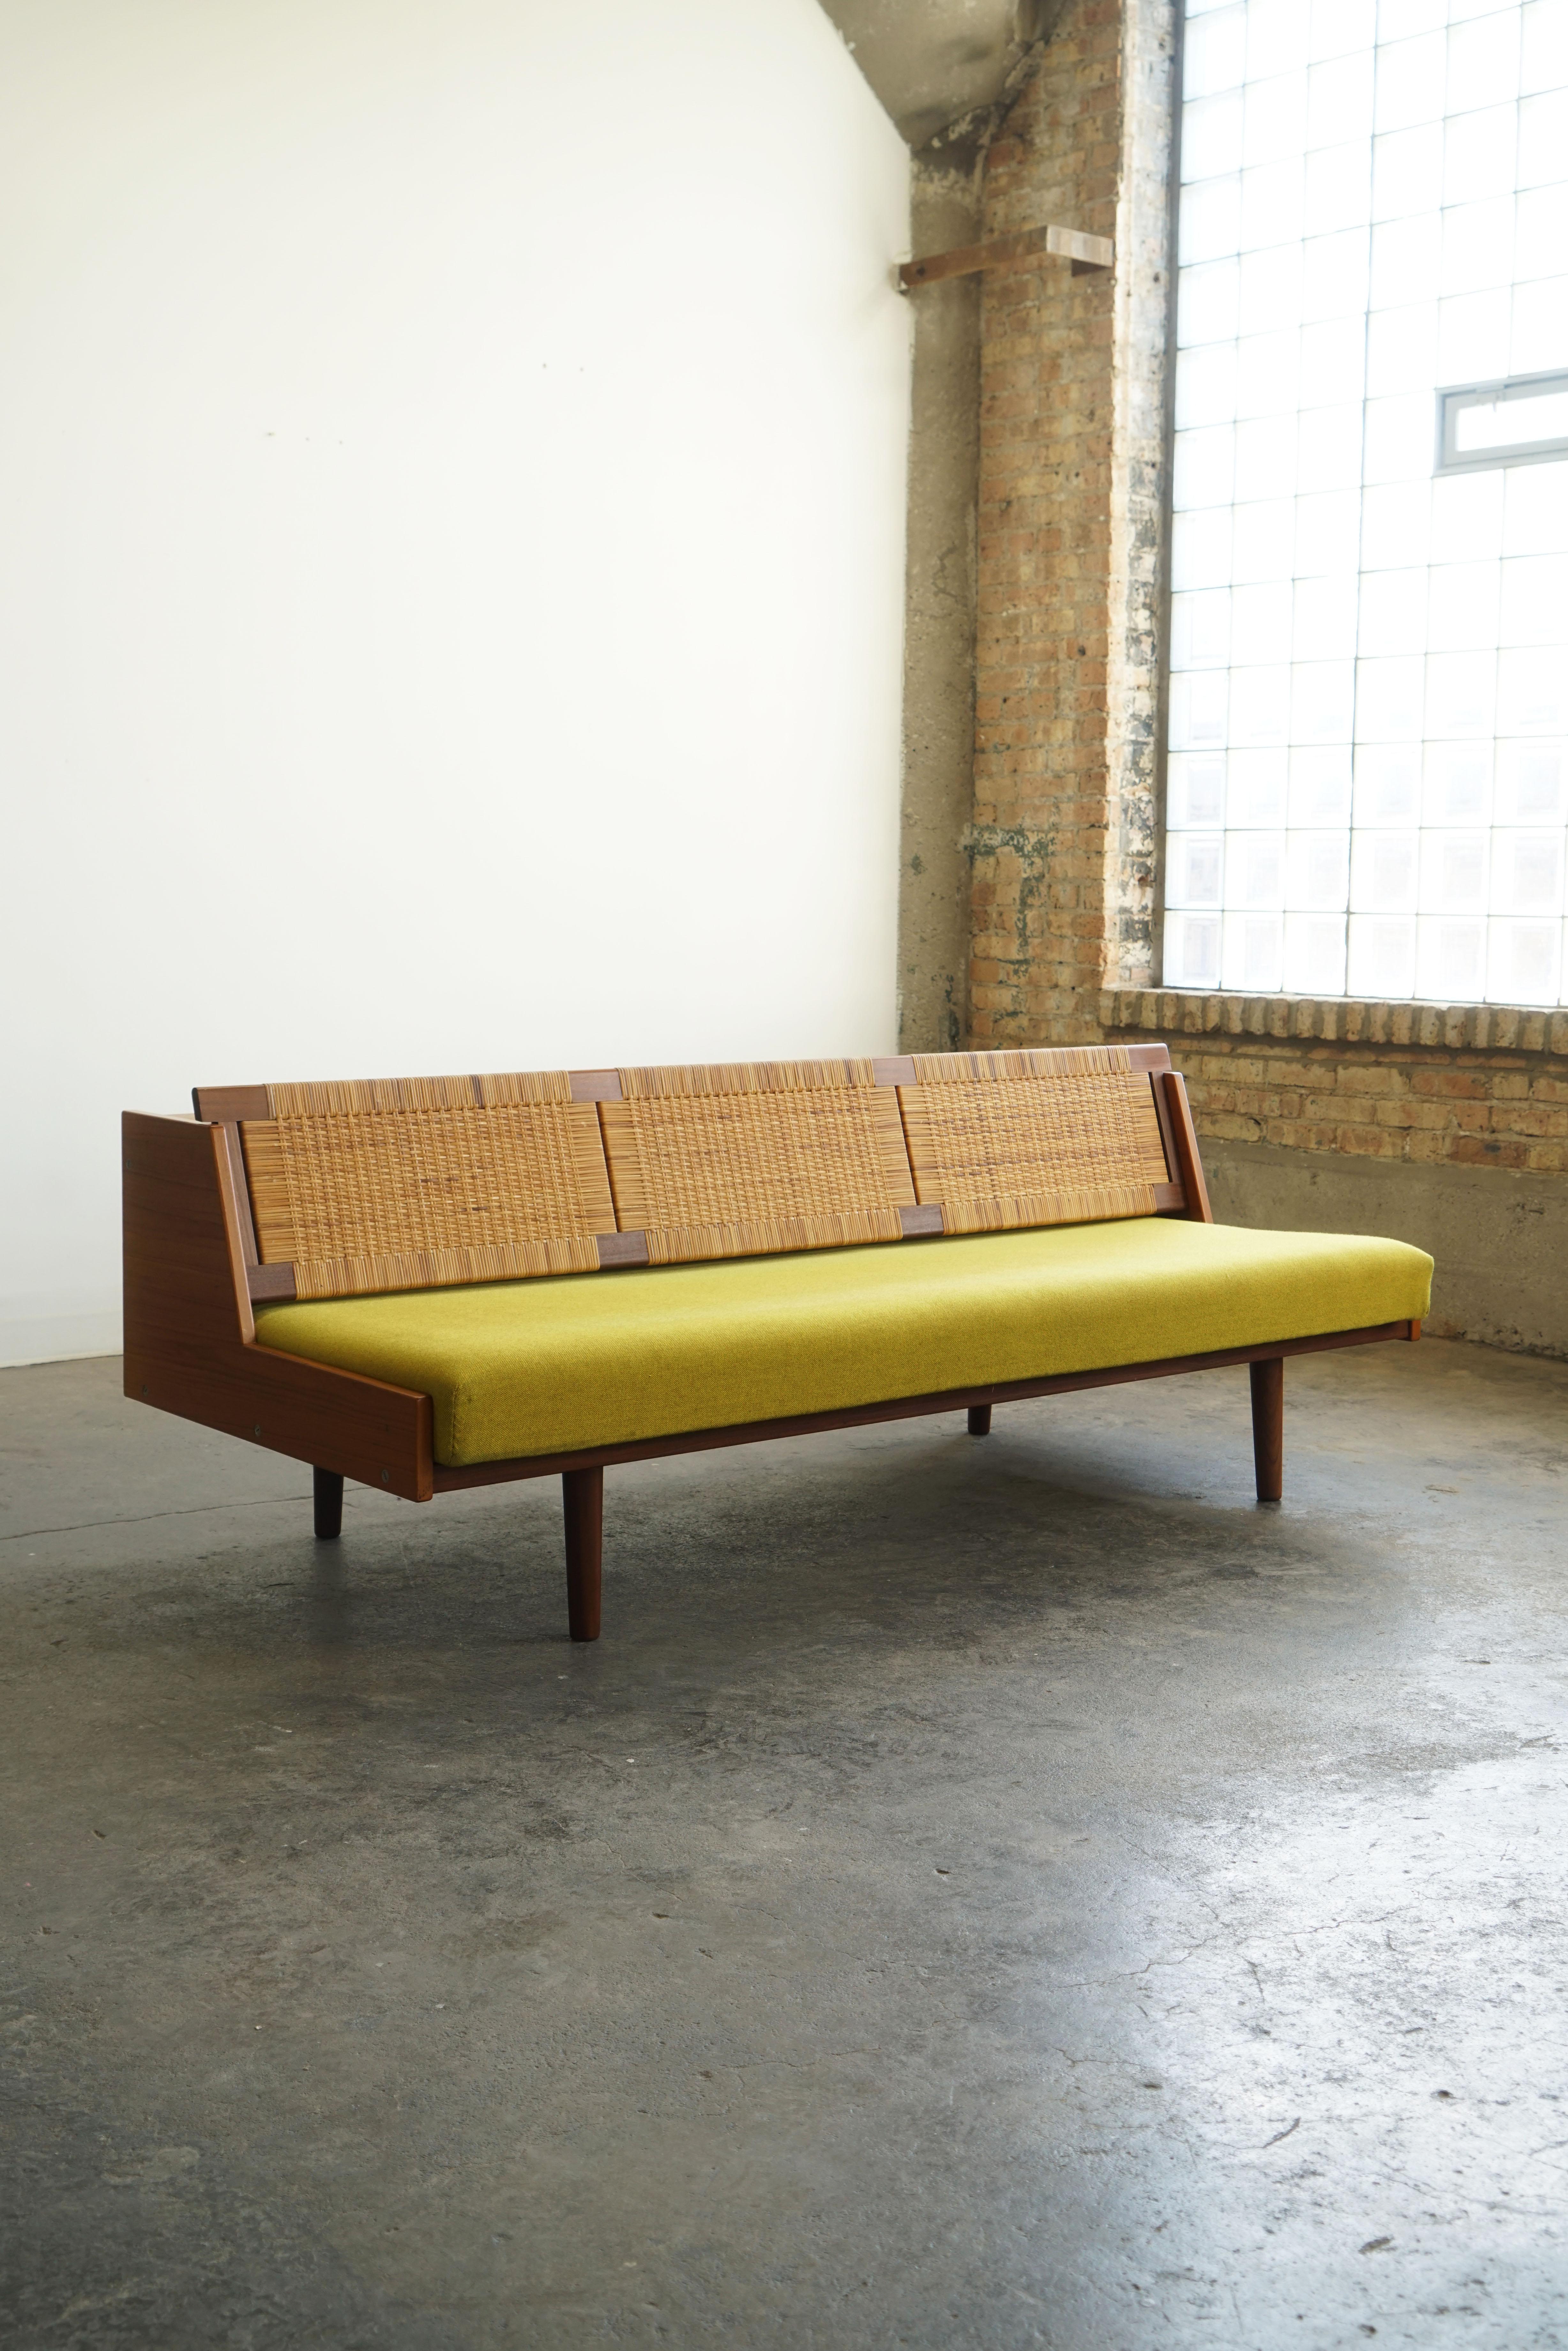 Hans J. Wegner for Getama, Daybed model GE 7
Denmark, circa 1965.
Teak, painted wood, upholstery, caning.

This really cool convertible daybed / sofa, designed by Hans J Wegner, features a 
woven cane back seat which opens up reveals a hidden space